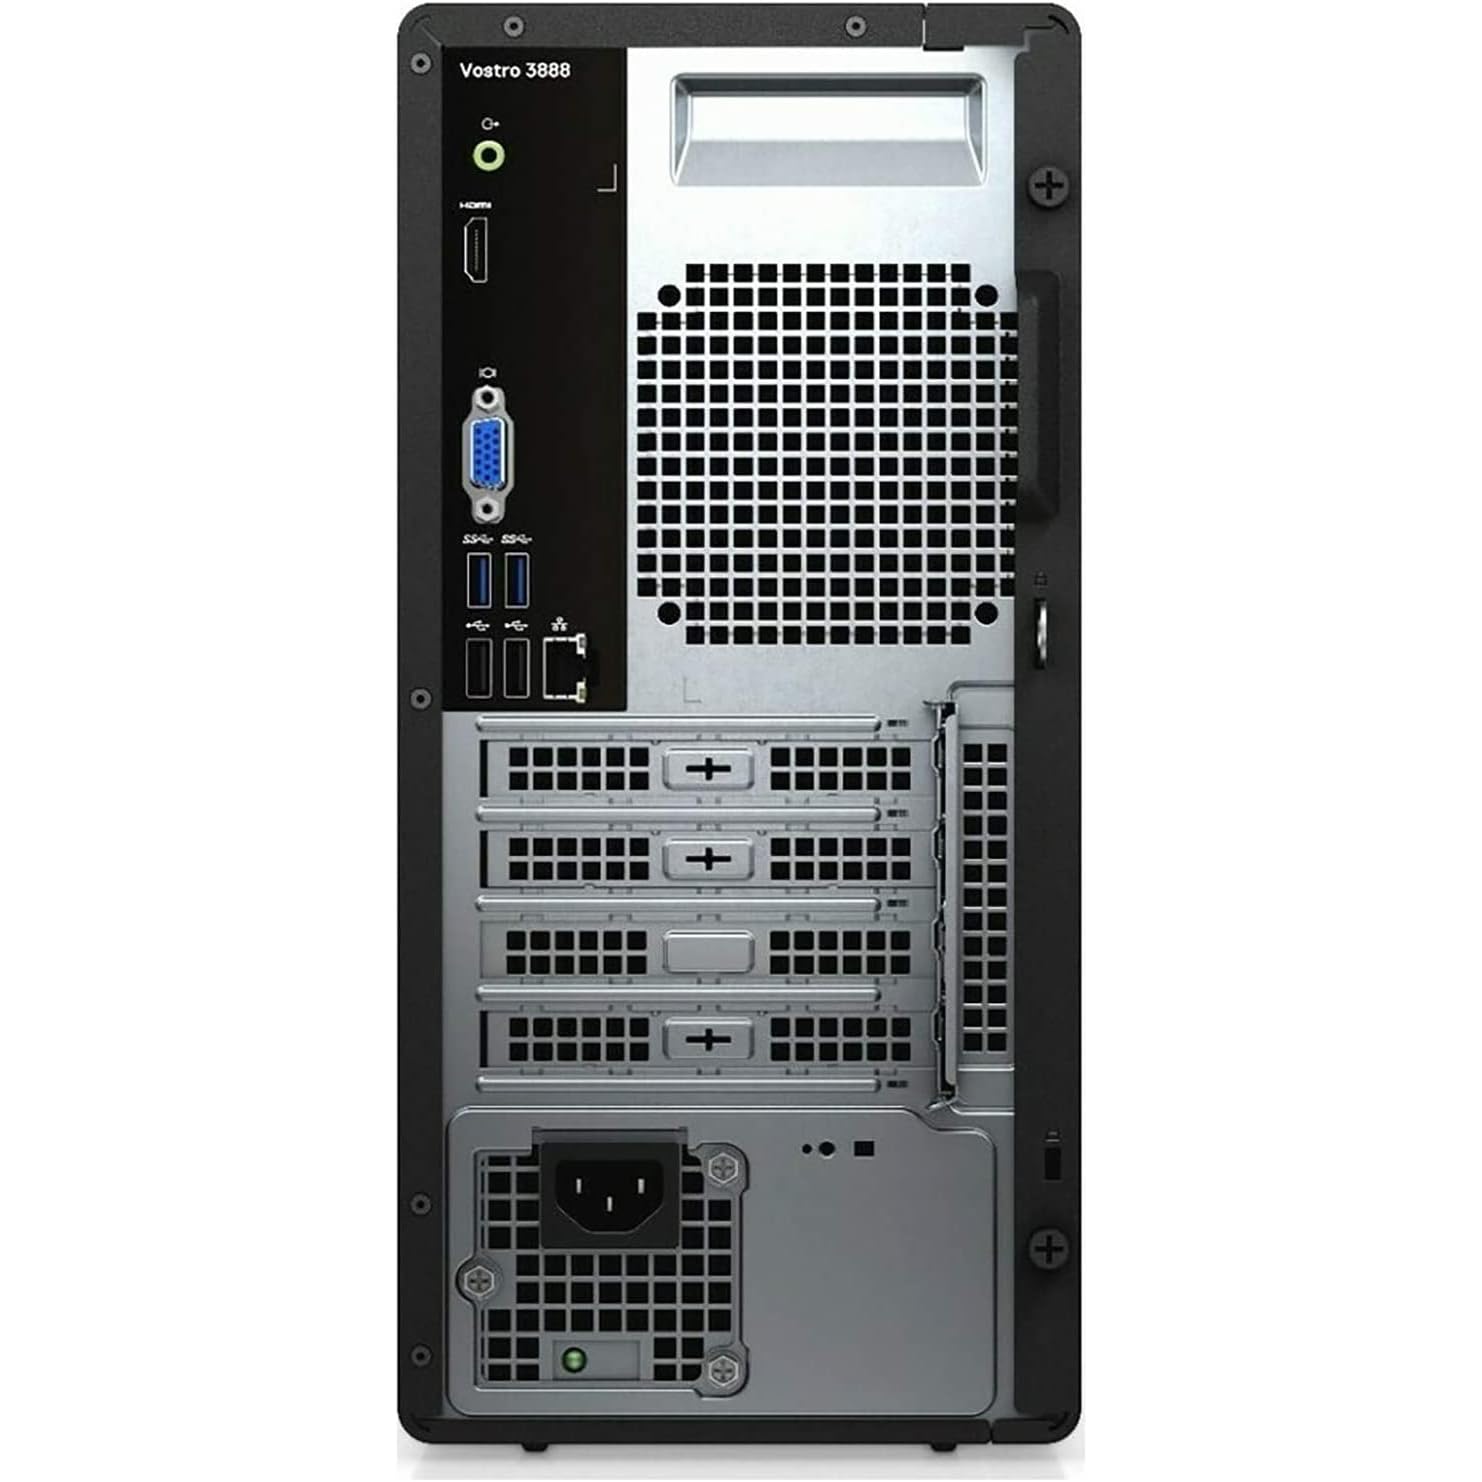 Dell Vostro 3888 Full Size Tower Business Desktop Computer, Intel Octa-Core i7-10700, 32GB DDR4 RAM, 2TB PCIe SSD + 1TB HDD, DVDRW, 802.11AC WiFi, Bluetooth, Keyboard and Mouse, Windows 11 Pro